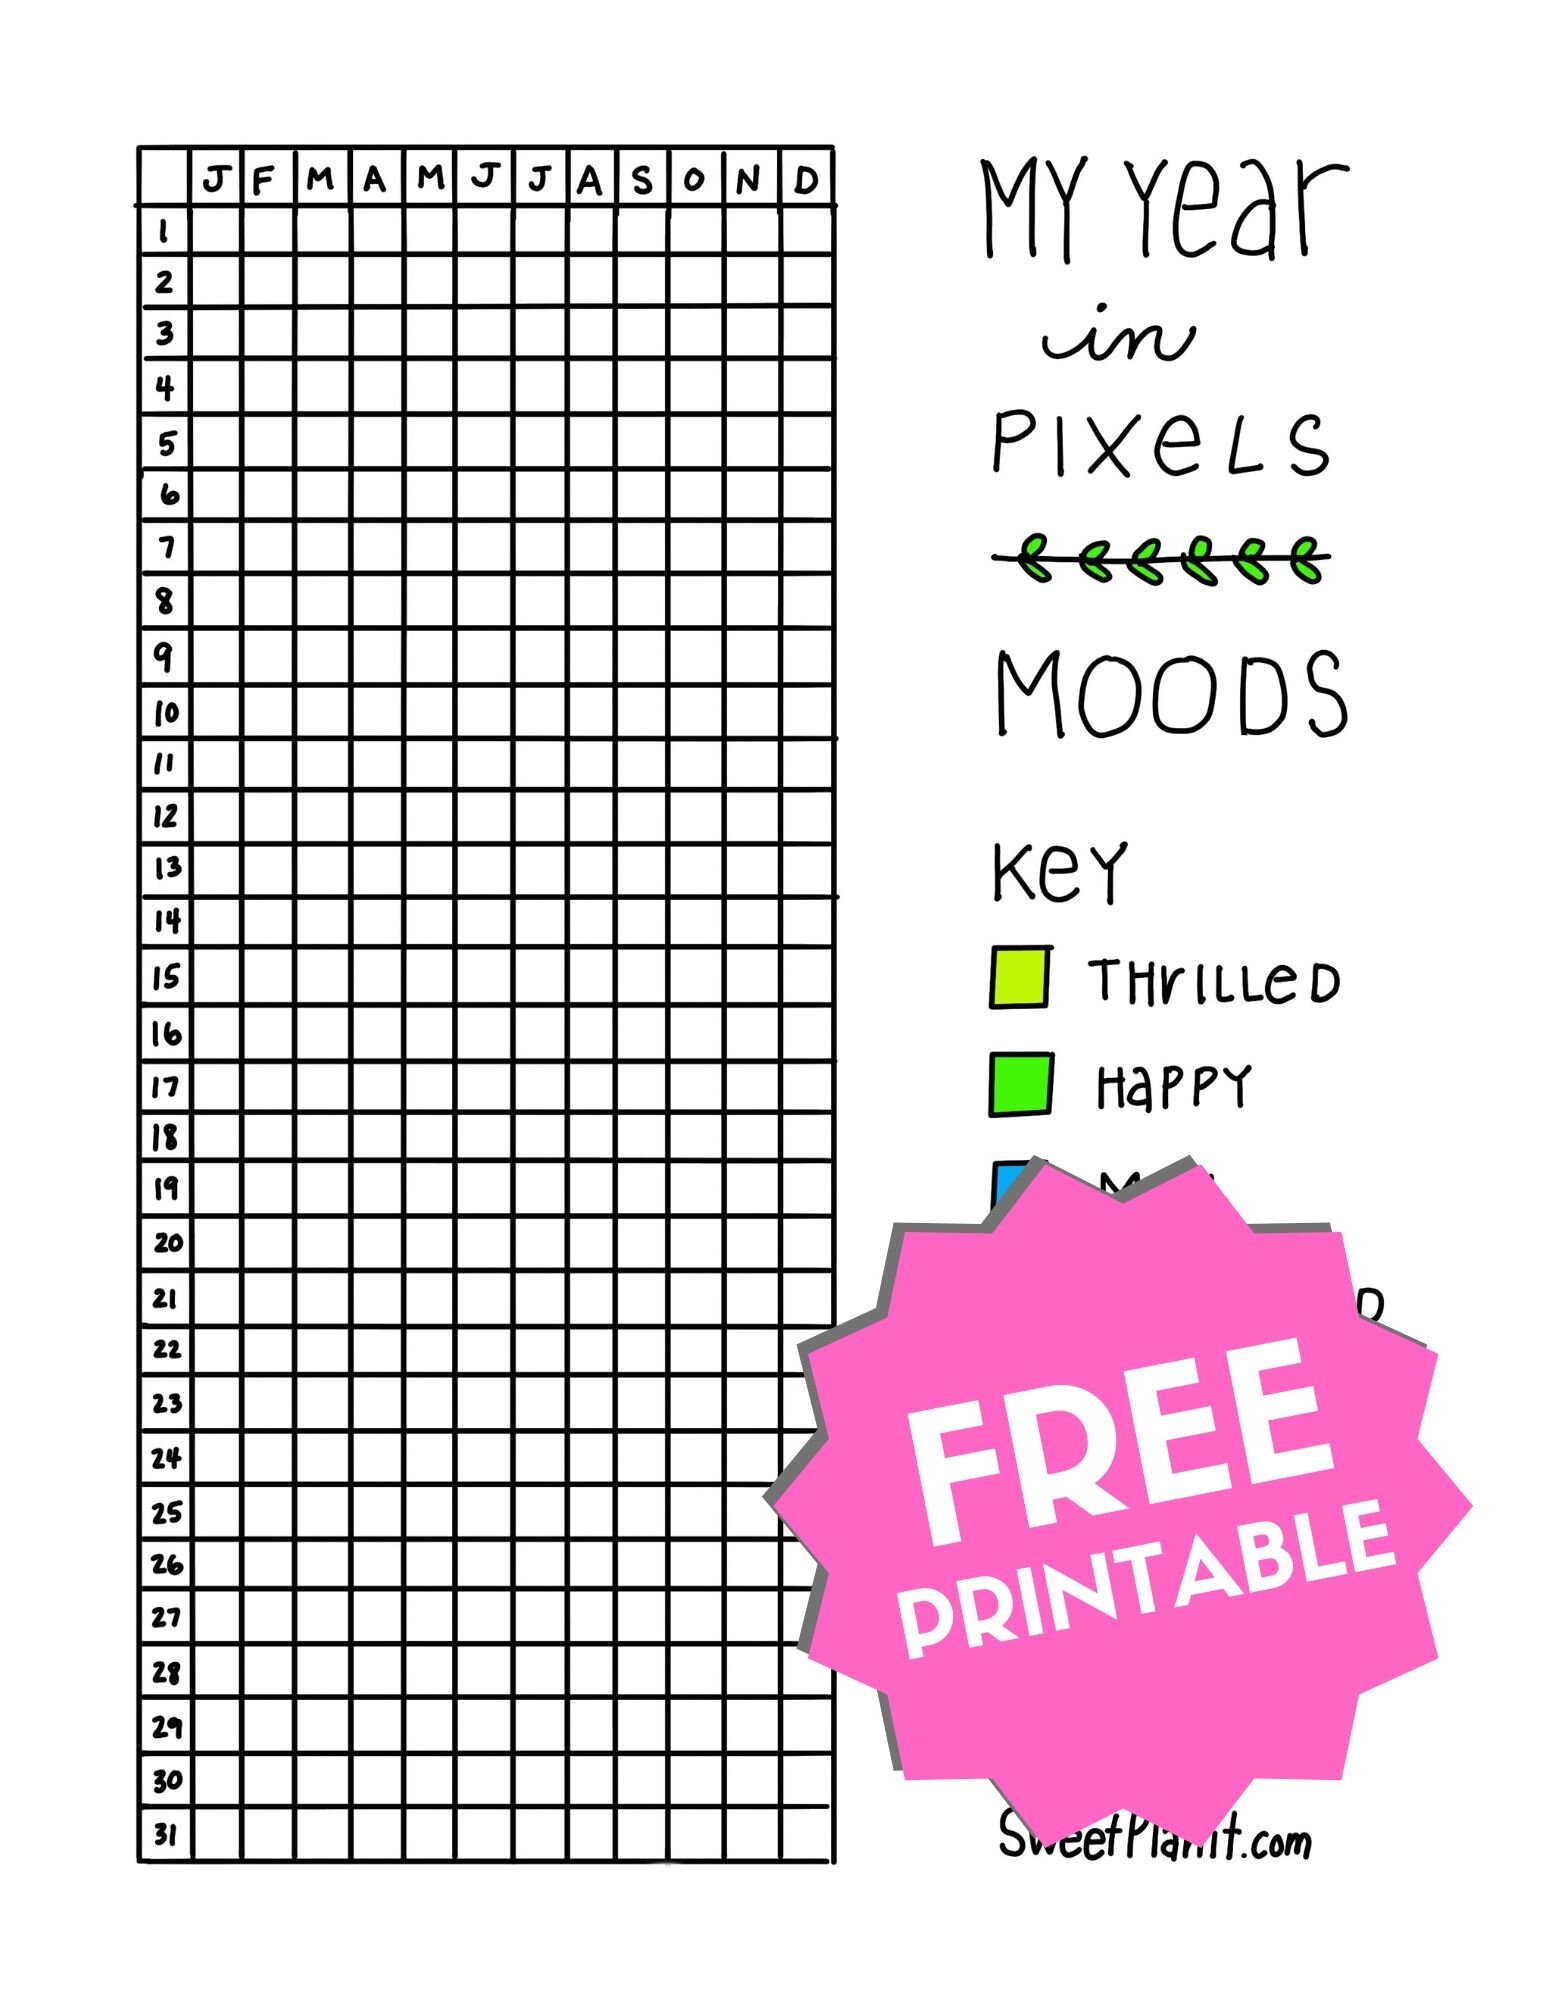 paper-party-supplies-calendars-planners-paper-a-year-in-pixels